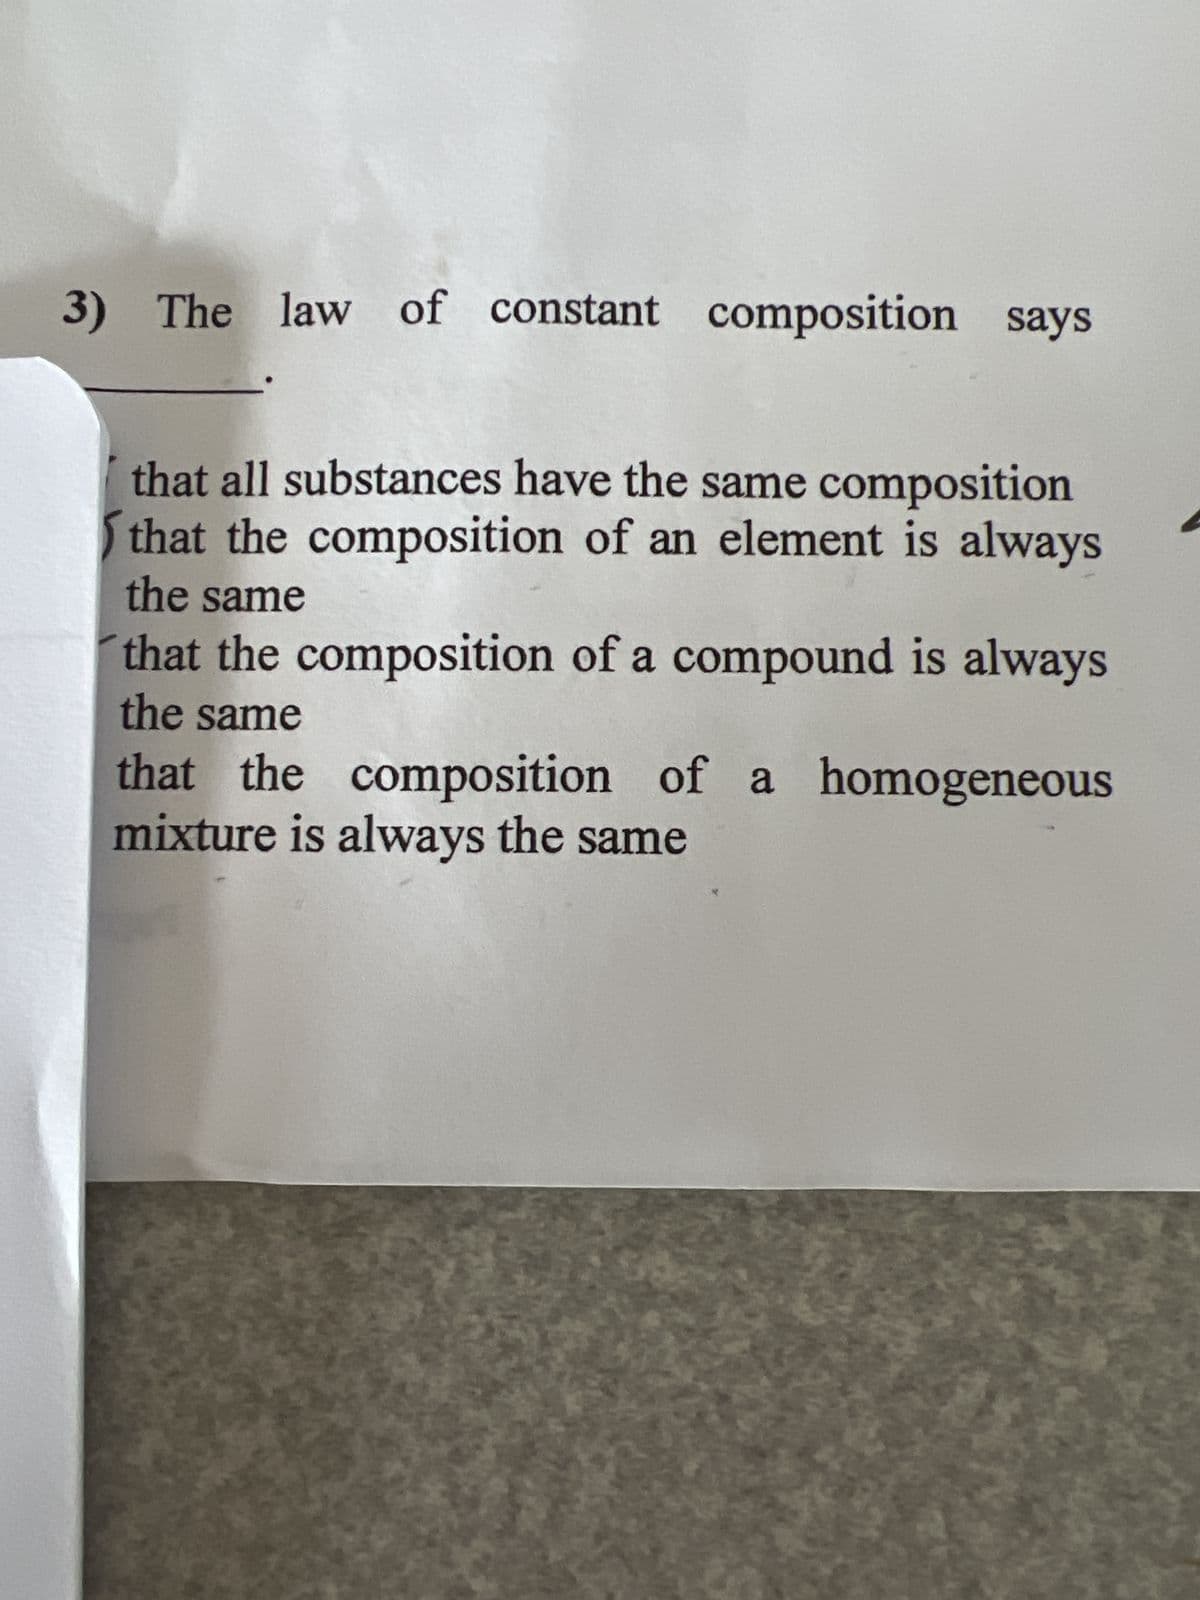 3) The law of constant composition says
that all substances have the same composition
that the composition of an element is always
the same
that the composition of a compound is always
the same
that the composition of a homogeneous
mixture is always the same